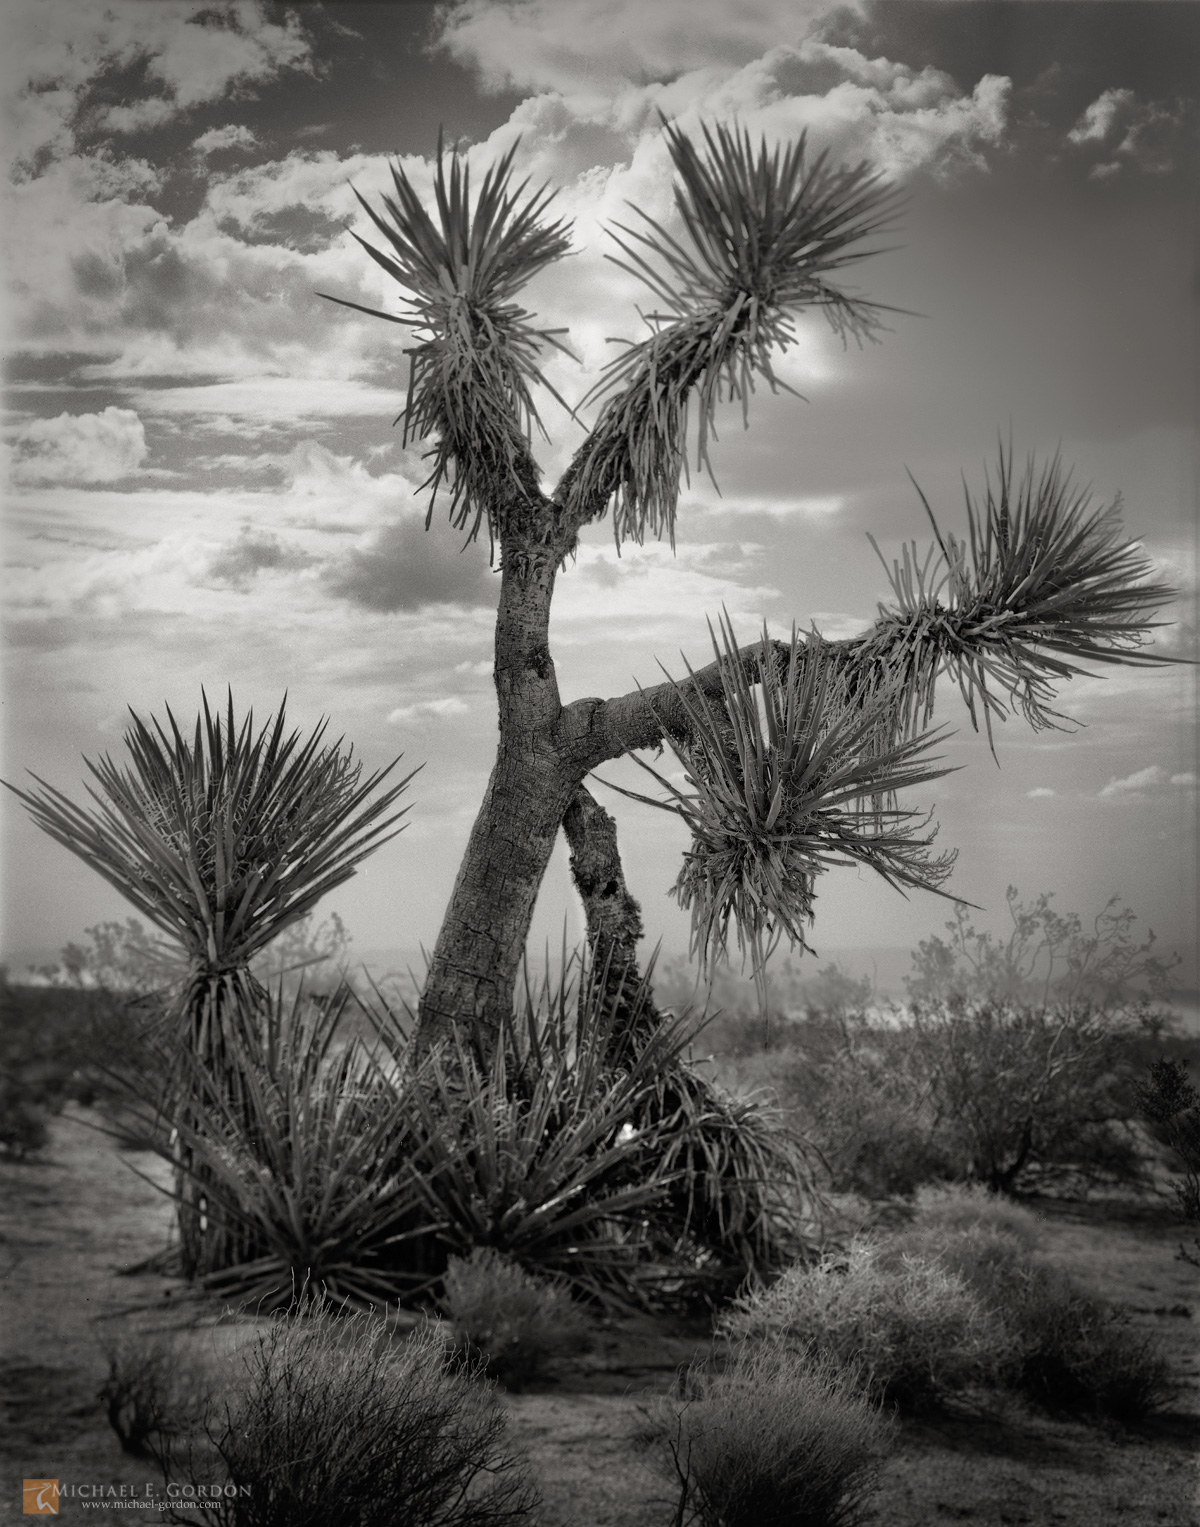 Mojave Yucca (Yucca schidigera) backed by summer monsoon clouds and weather. Every photograph on this website and&nbsp;blog&nbsp...